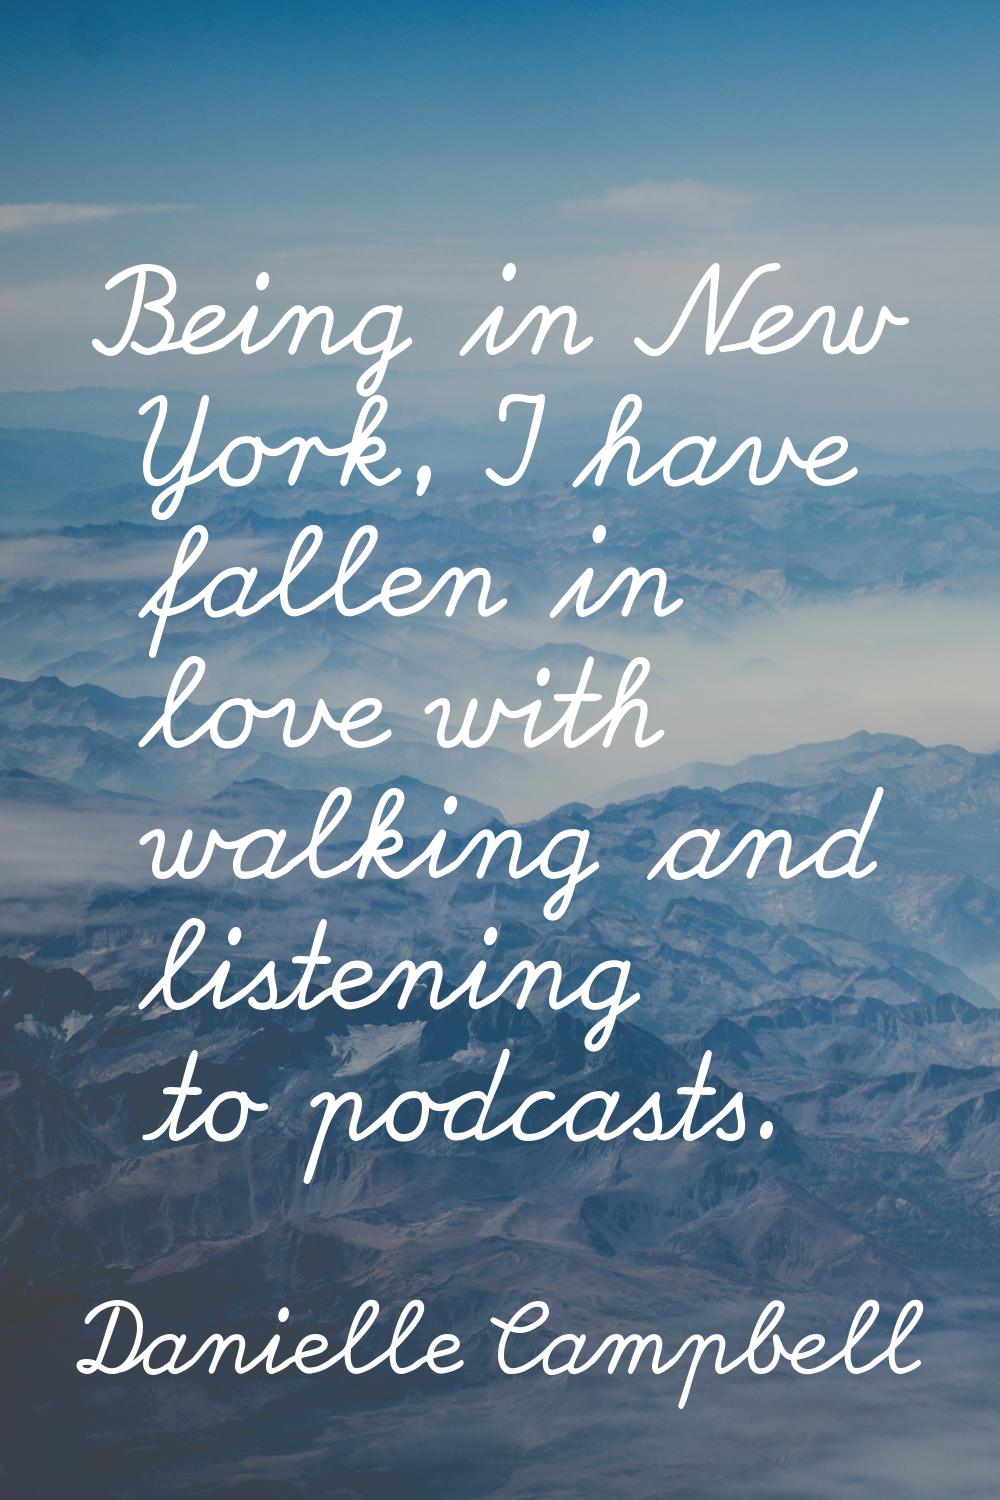 Being in New York, I have fallen in love with walking and listening to podcasts.